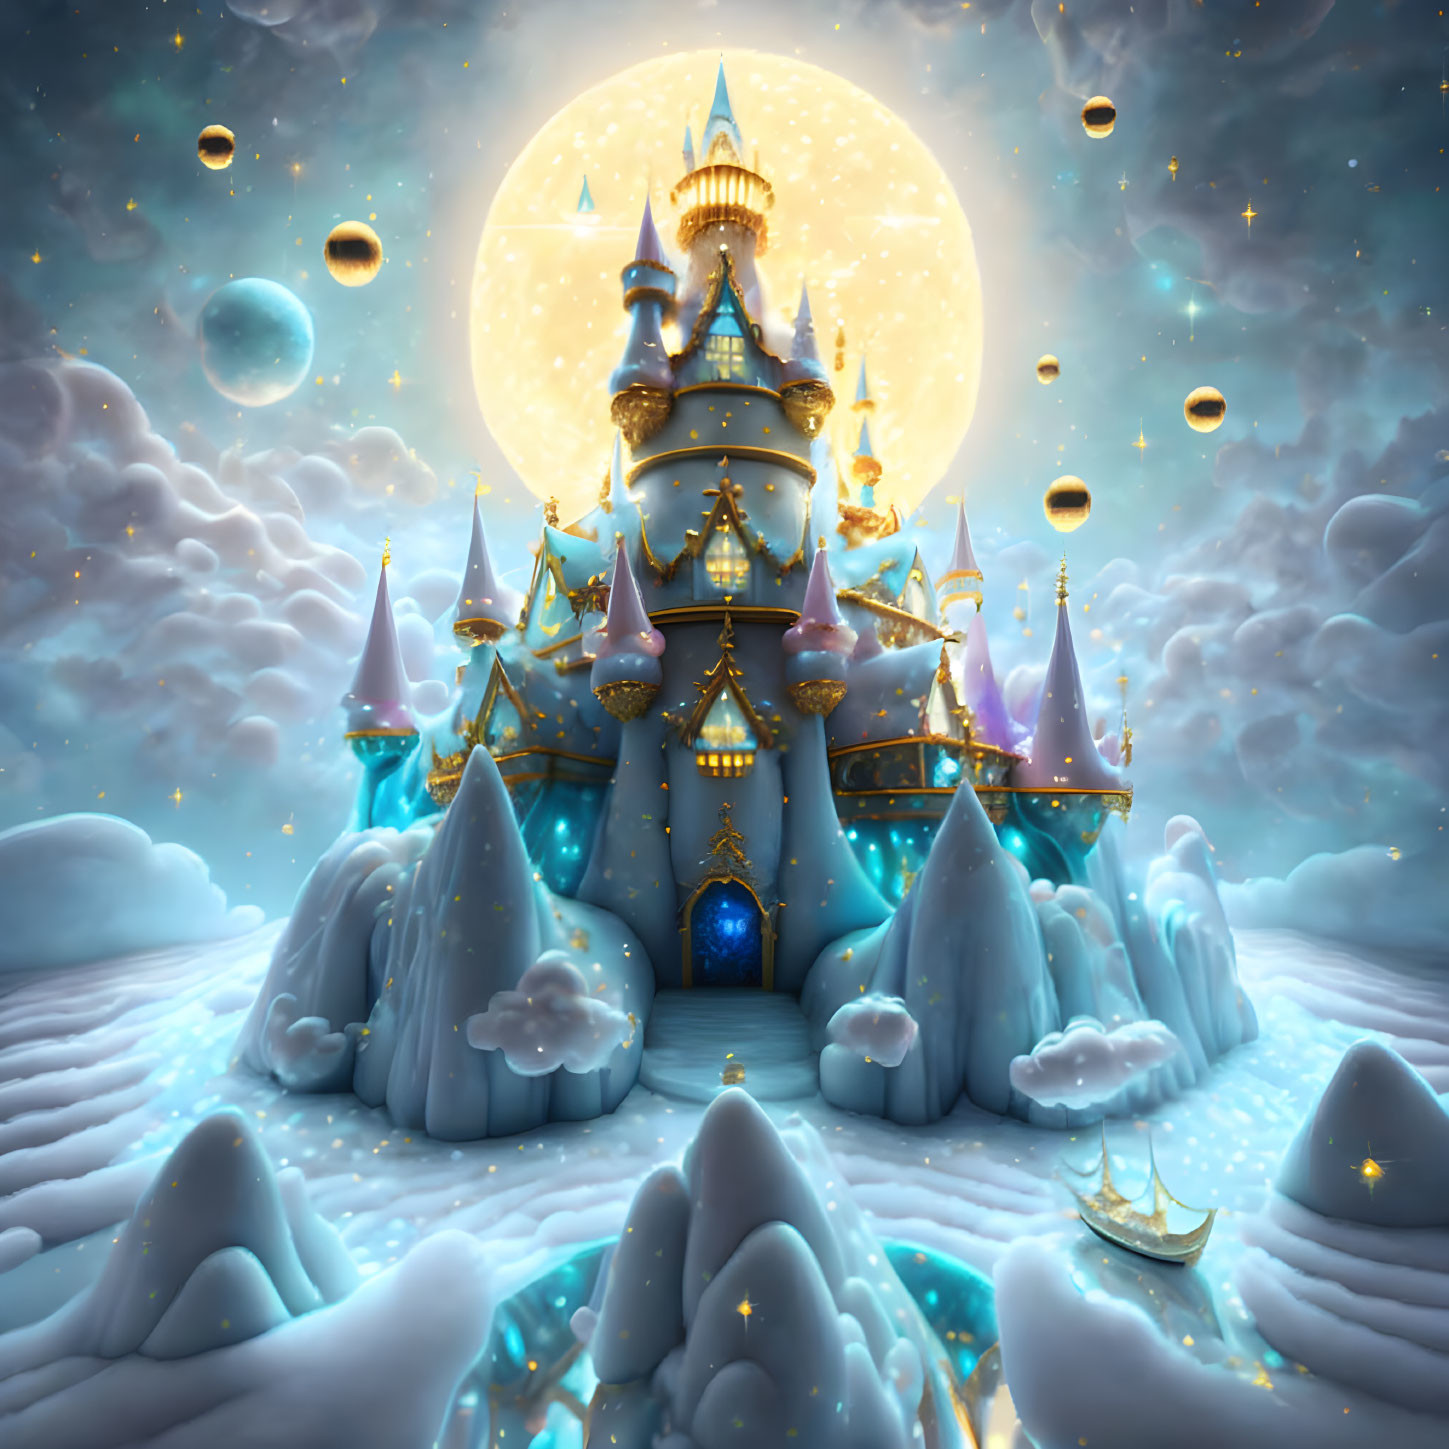 Castle with spires under moonlight in snowy landscape